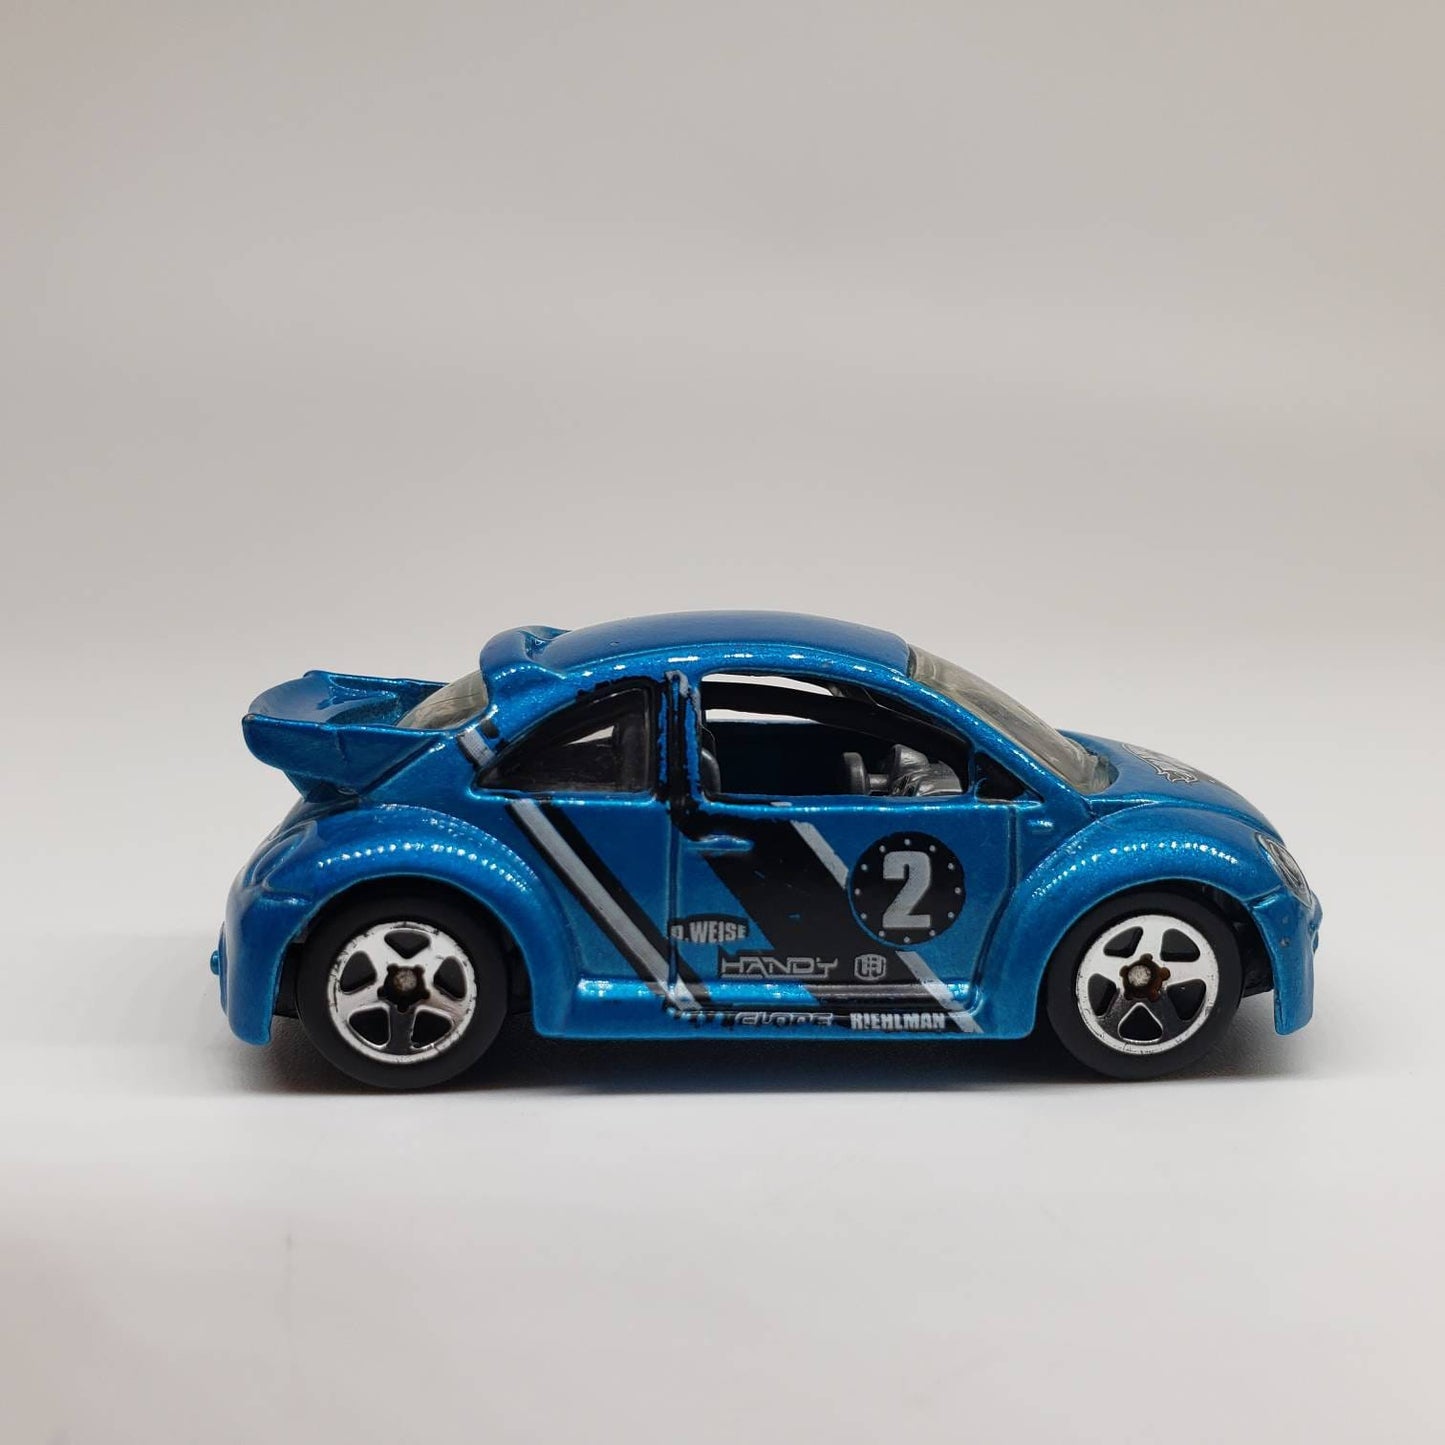 Hot Wheels Volkswagen New Beetle Cup Metalflake Blue Mainline Perfect Birthday Gift Miniature Collectable Scale Model Toy Car